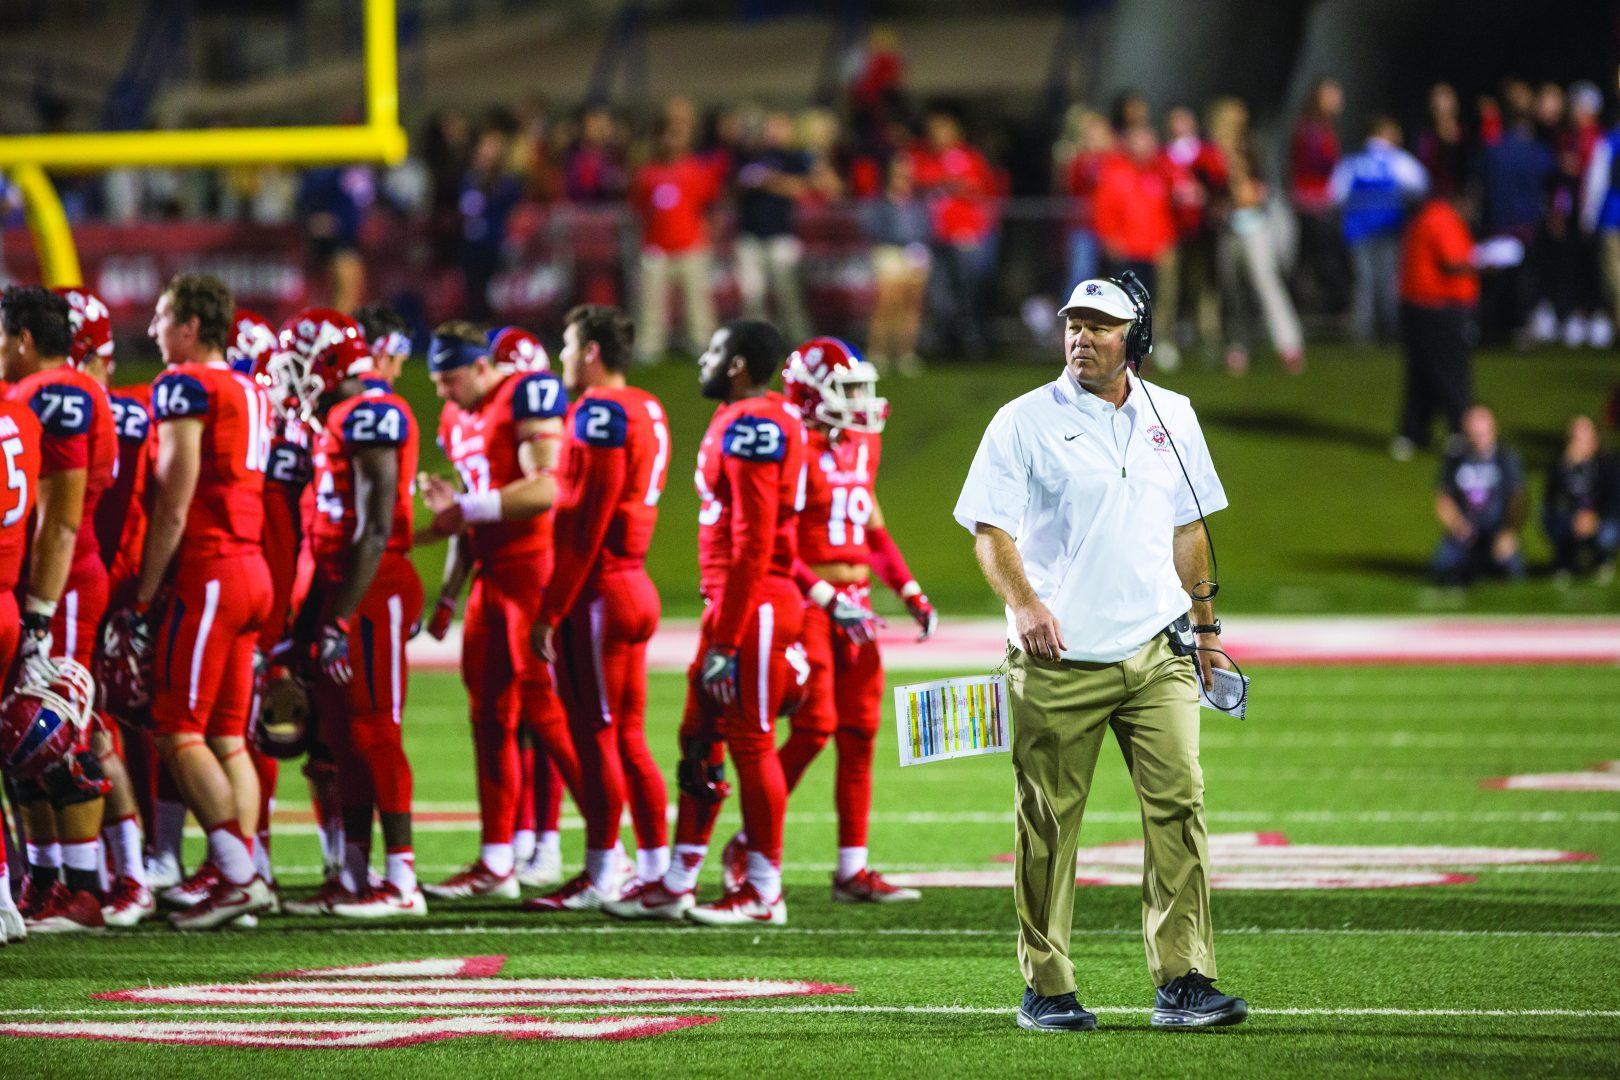 Former Fresno State head football coach Tim DeRuyter returns to the sideline after talking to the team during a game against San Diego State on Oct. 14, 2016, at Bulldog Stadium. (Khone Saysamongdy/The Collegian)